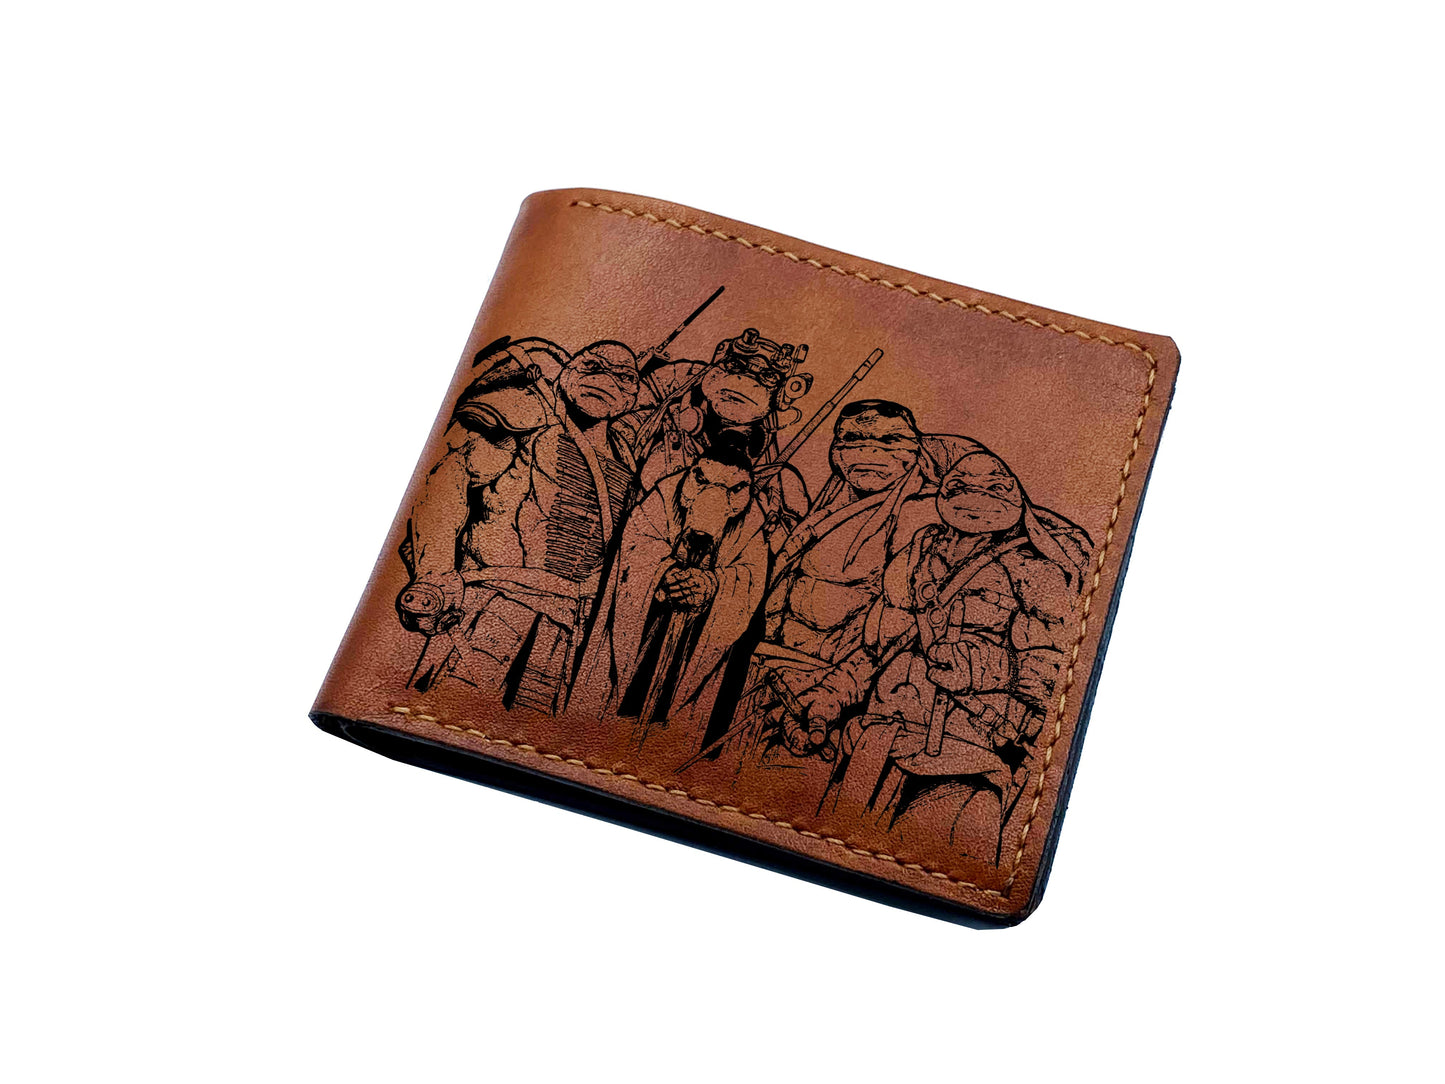 Mayan Corner - Personalized genuine leather handmade wallet, leather gift ideas for him, ninja turtle leather art wallet - 0111223